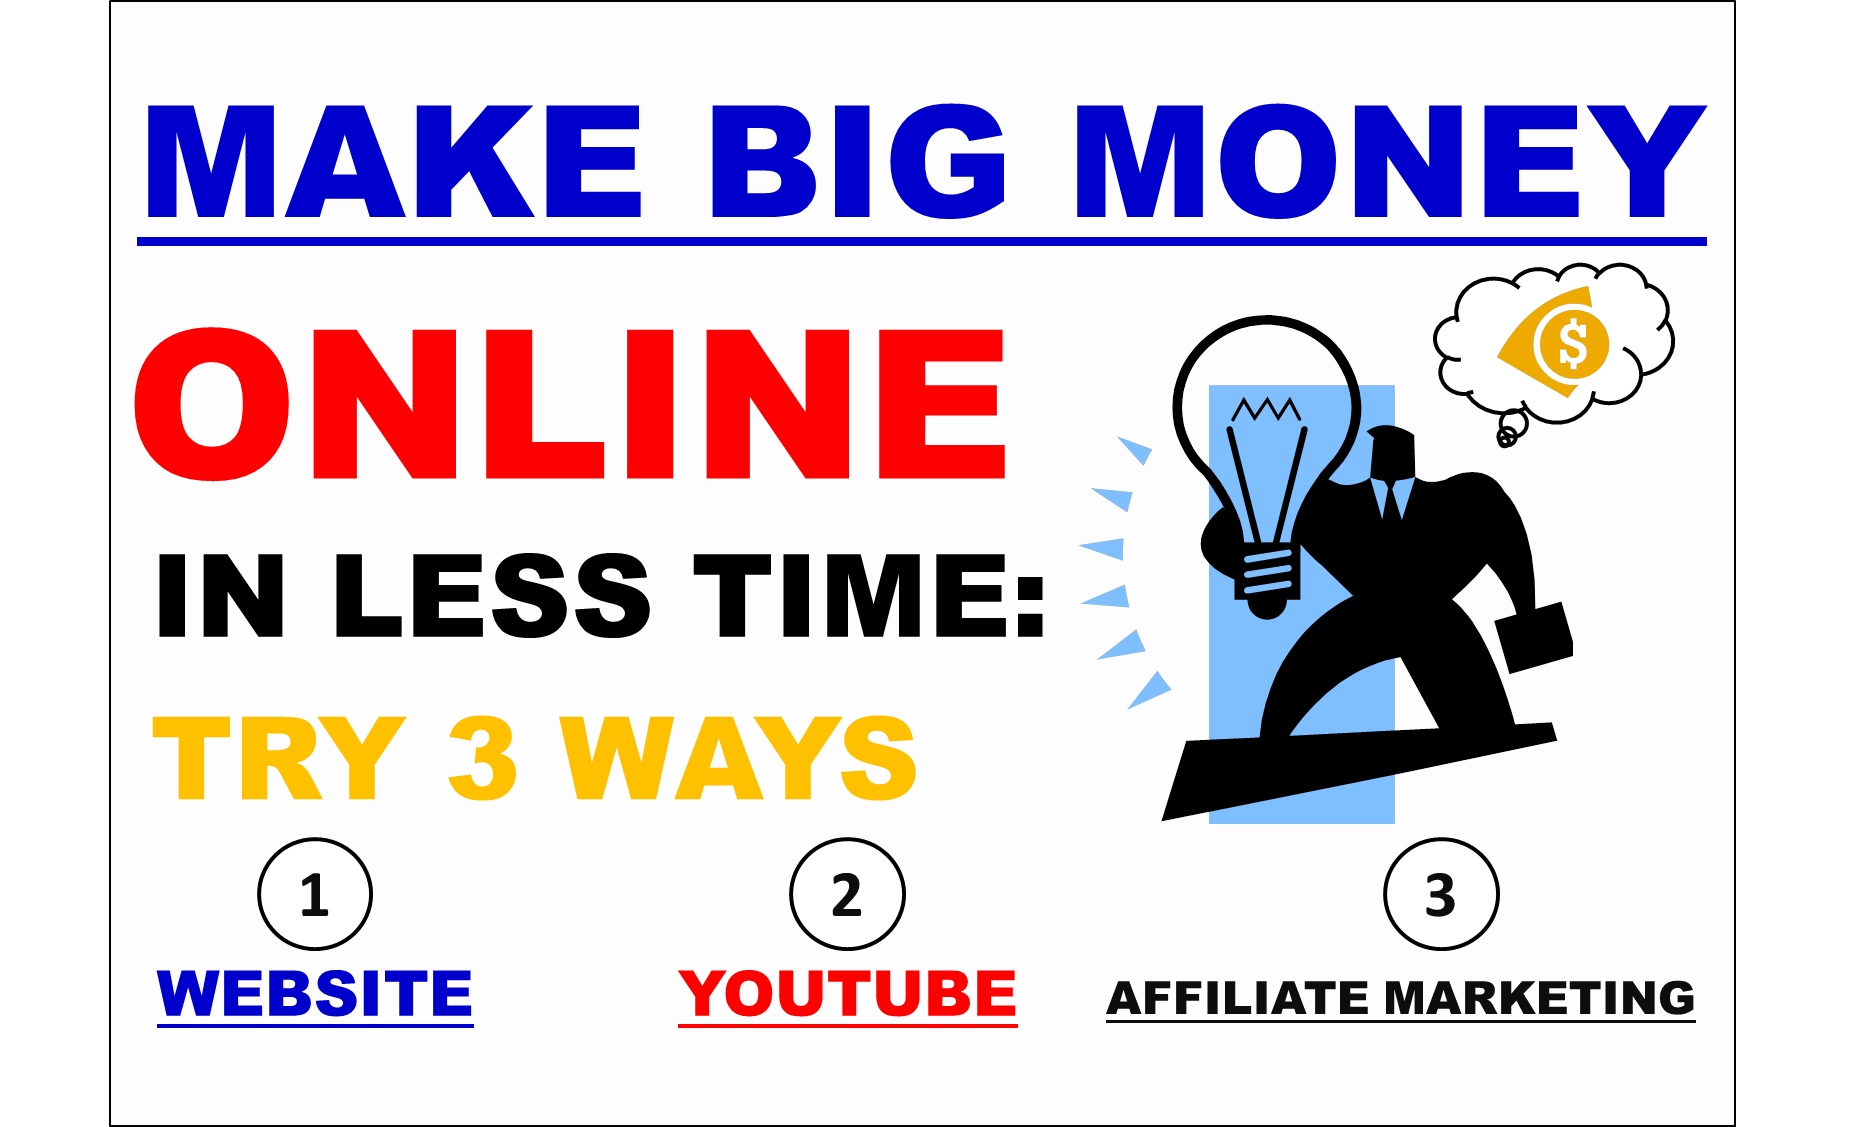 Make big money💰 online with less time: Try This 3 Ways